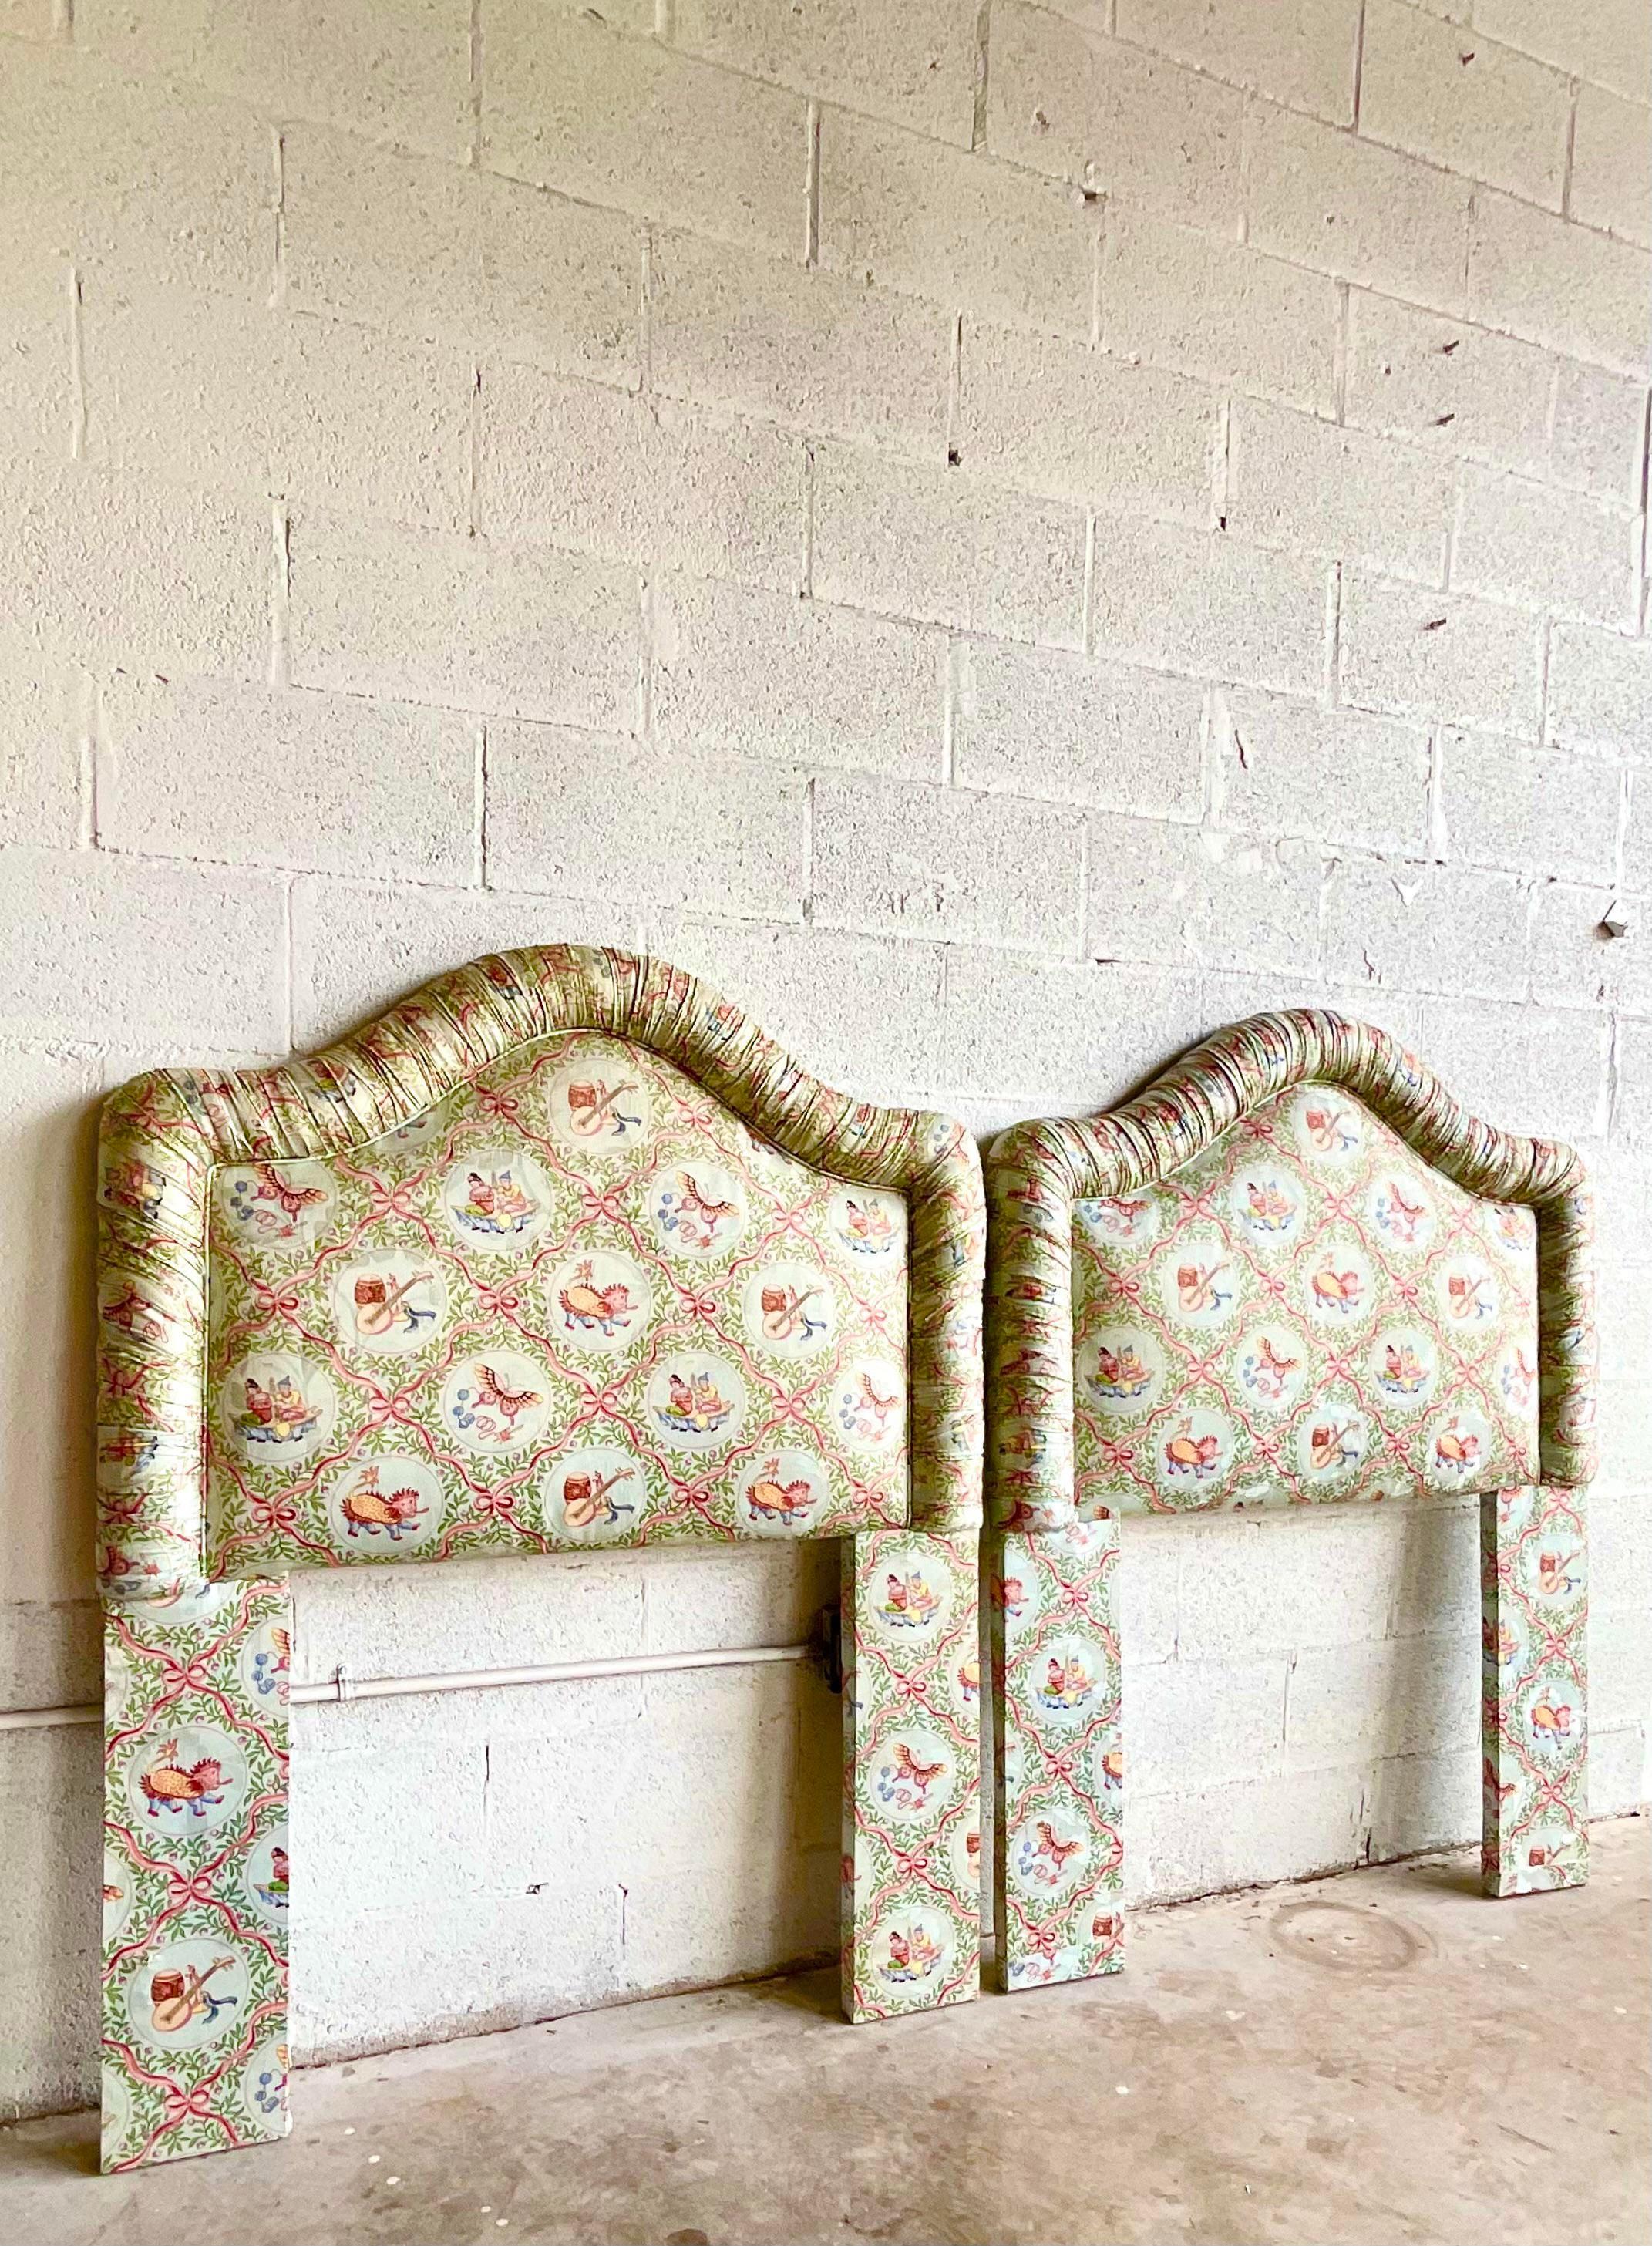 Fabric Vintage Asian Print Shirred Trim Twin Headboards For Sale